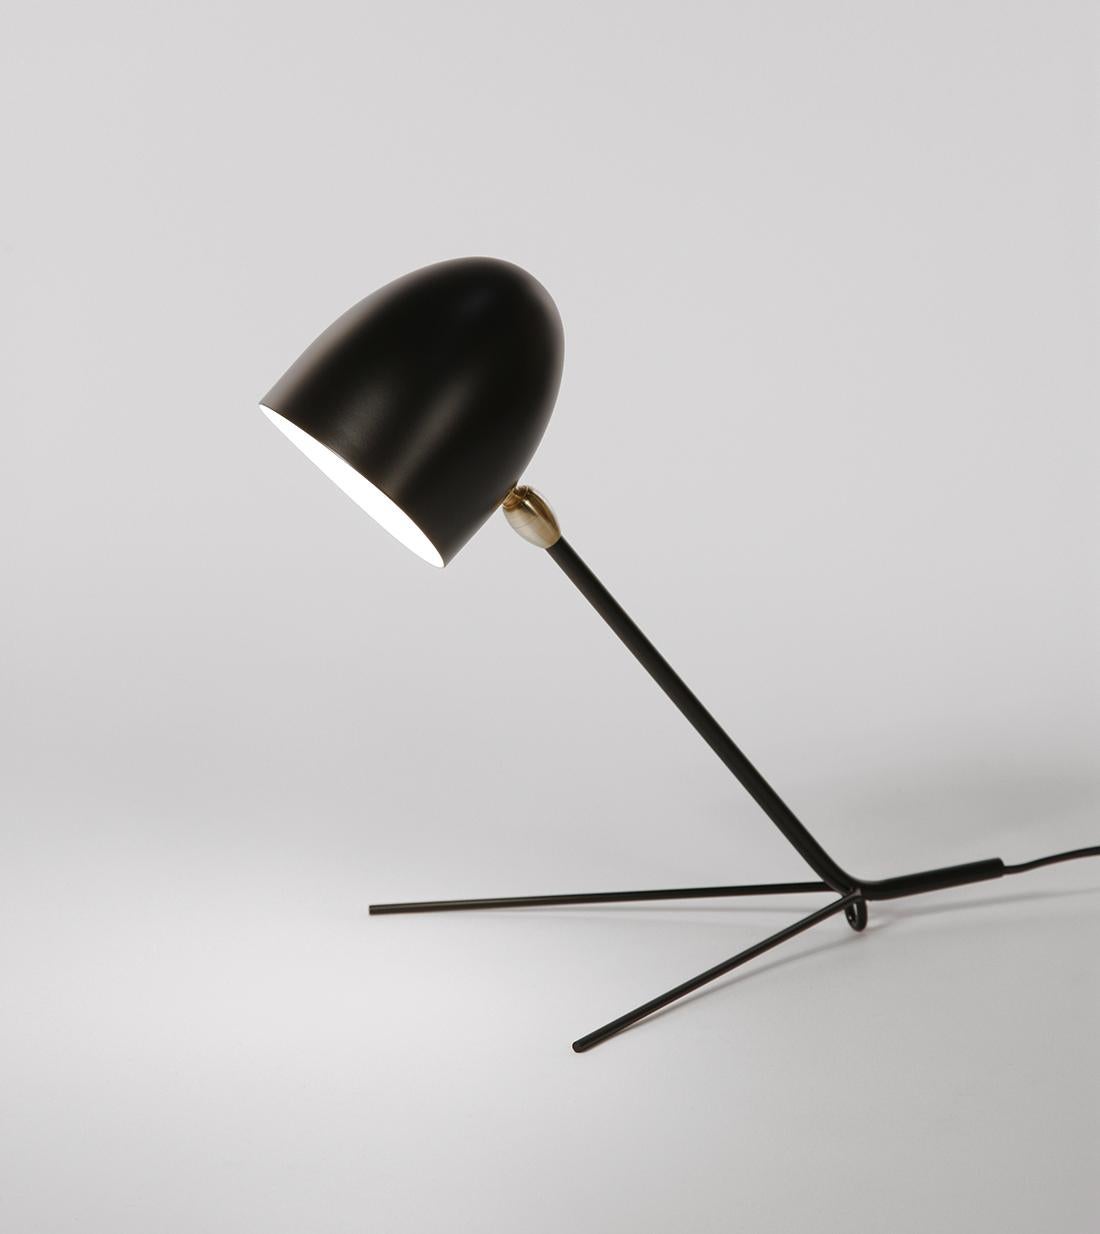 Table lamp model 'Cocotte Lamp' designed by Serge Mouille in 1957.

Manufactured by Editions Serge Mouille in France. The production of lamps, wall lights and floor lamps are manufactured using craftsman’s techniques with the same materials and